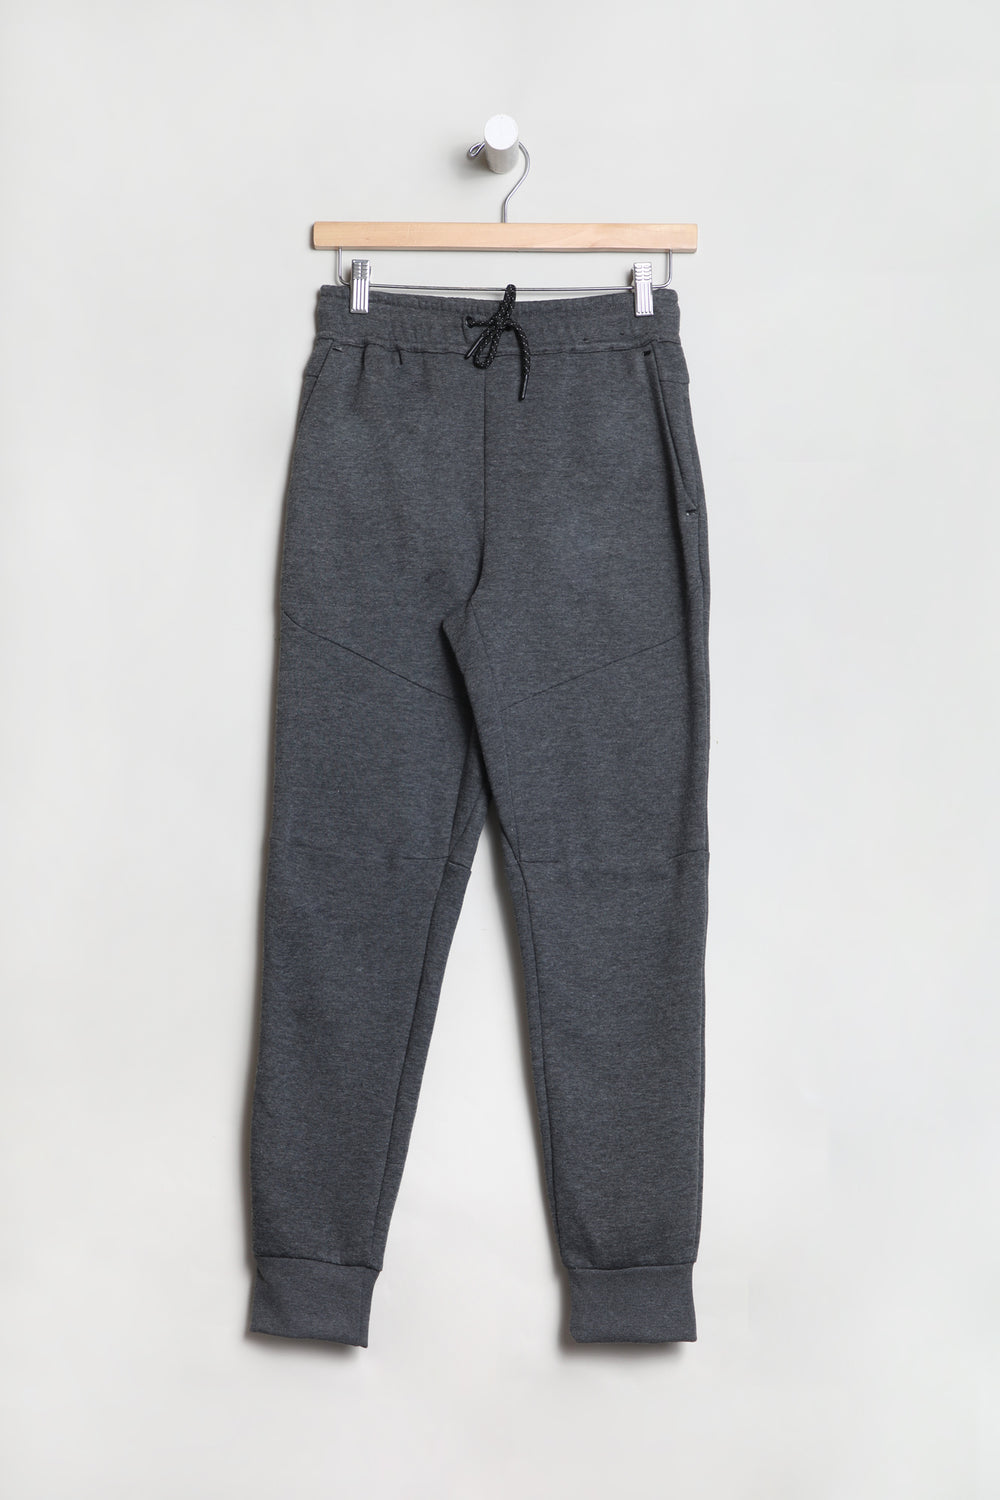 West49 Youth Basic Sport Jogger Charcoal